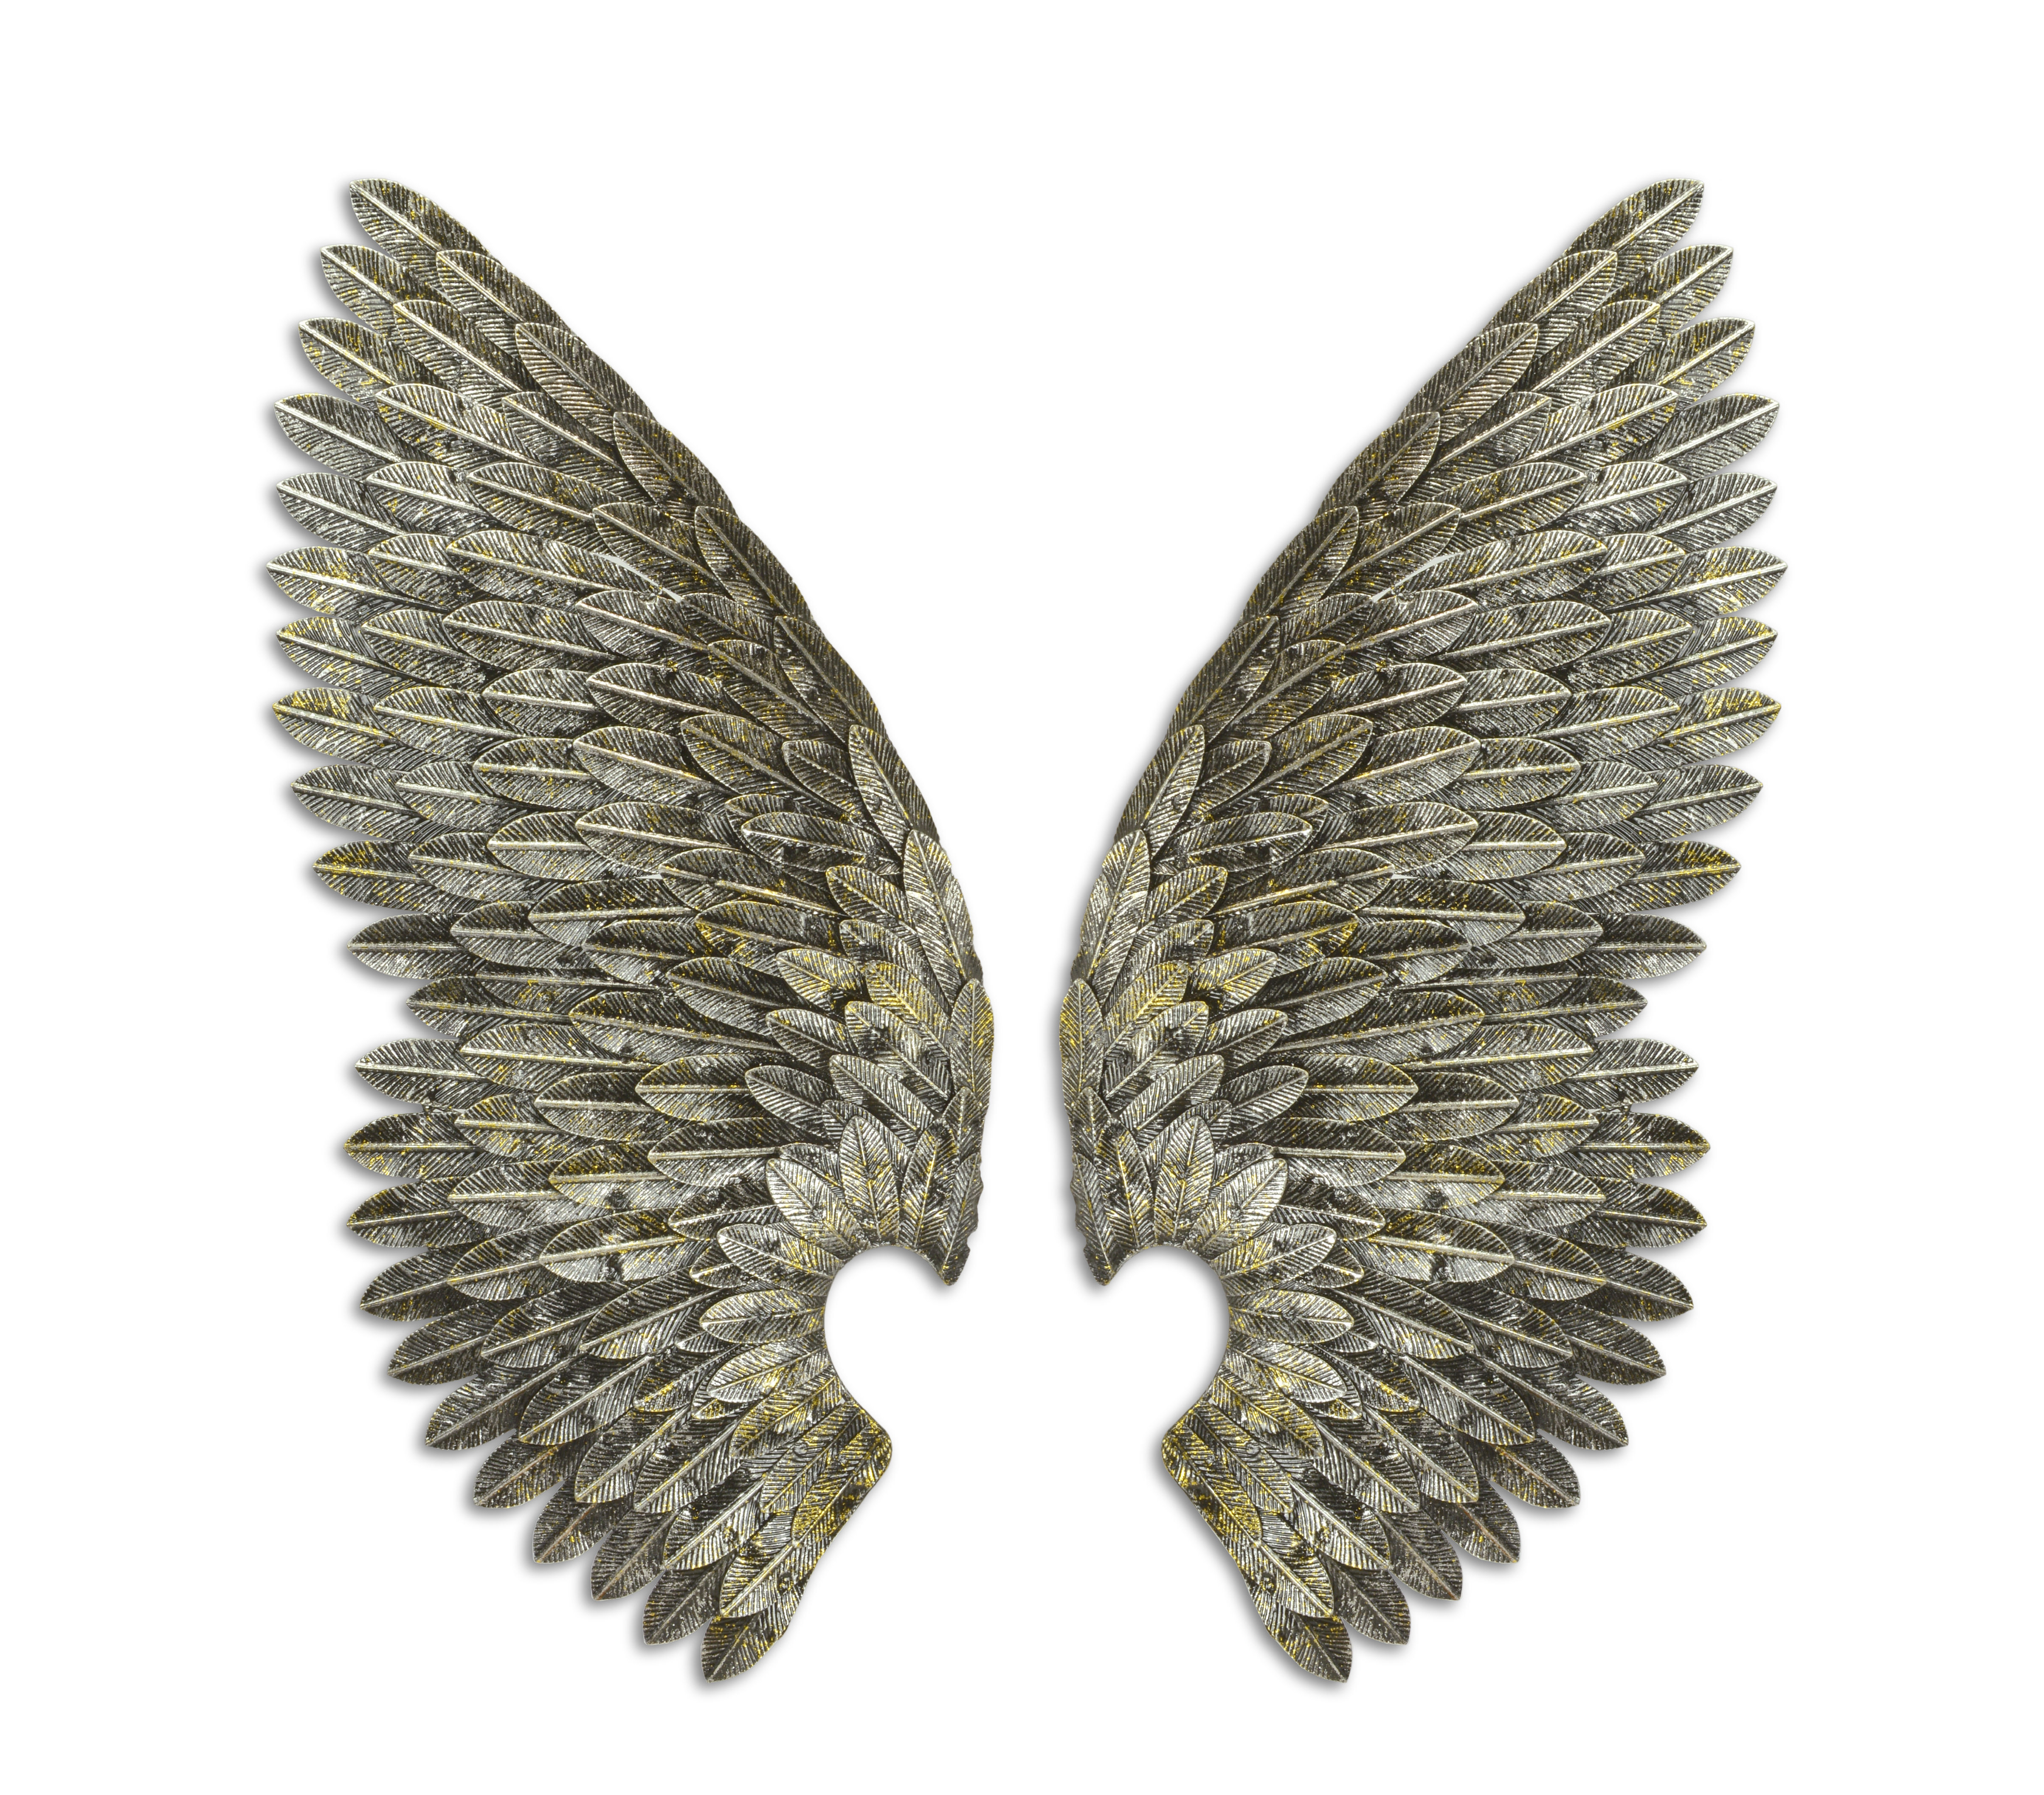 A PAIR OF WALL MOUNTED ANGEL WINGS